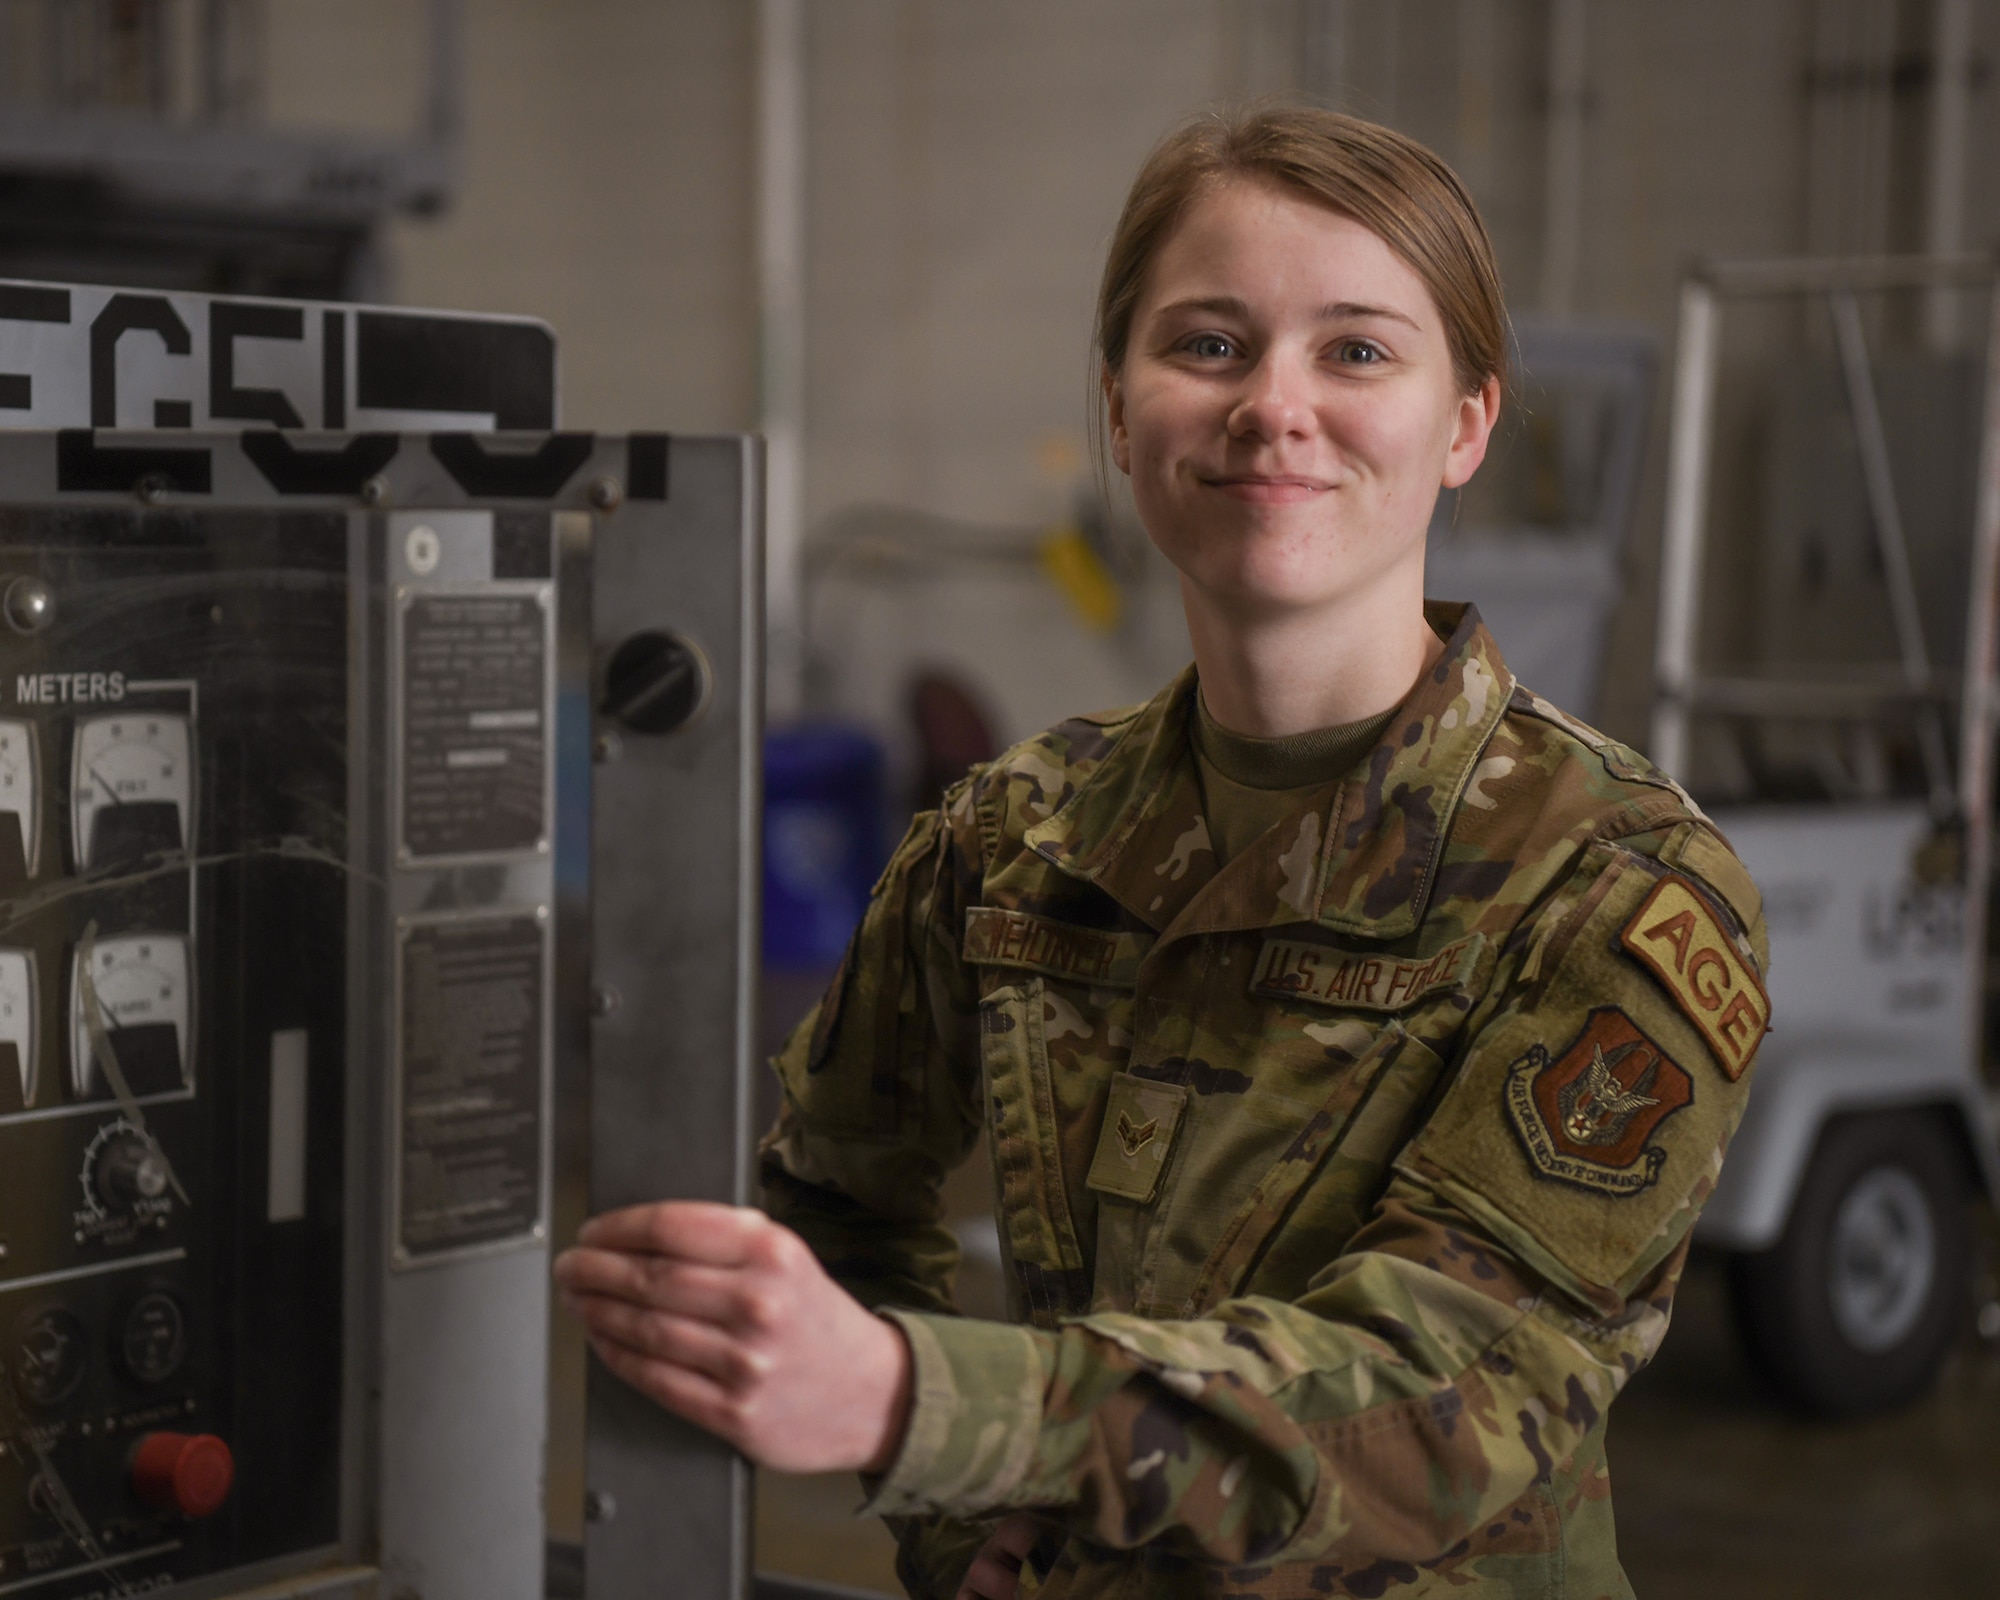 Airman 1st Class Phoebe Weidner, 445th Maintenance Squadron aerospace ground equipment journeyman, is the 445th Airlift Wing April 2022 Spotlight Performer.